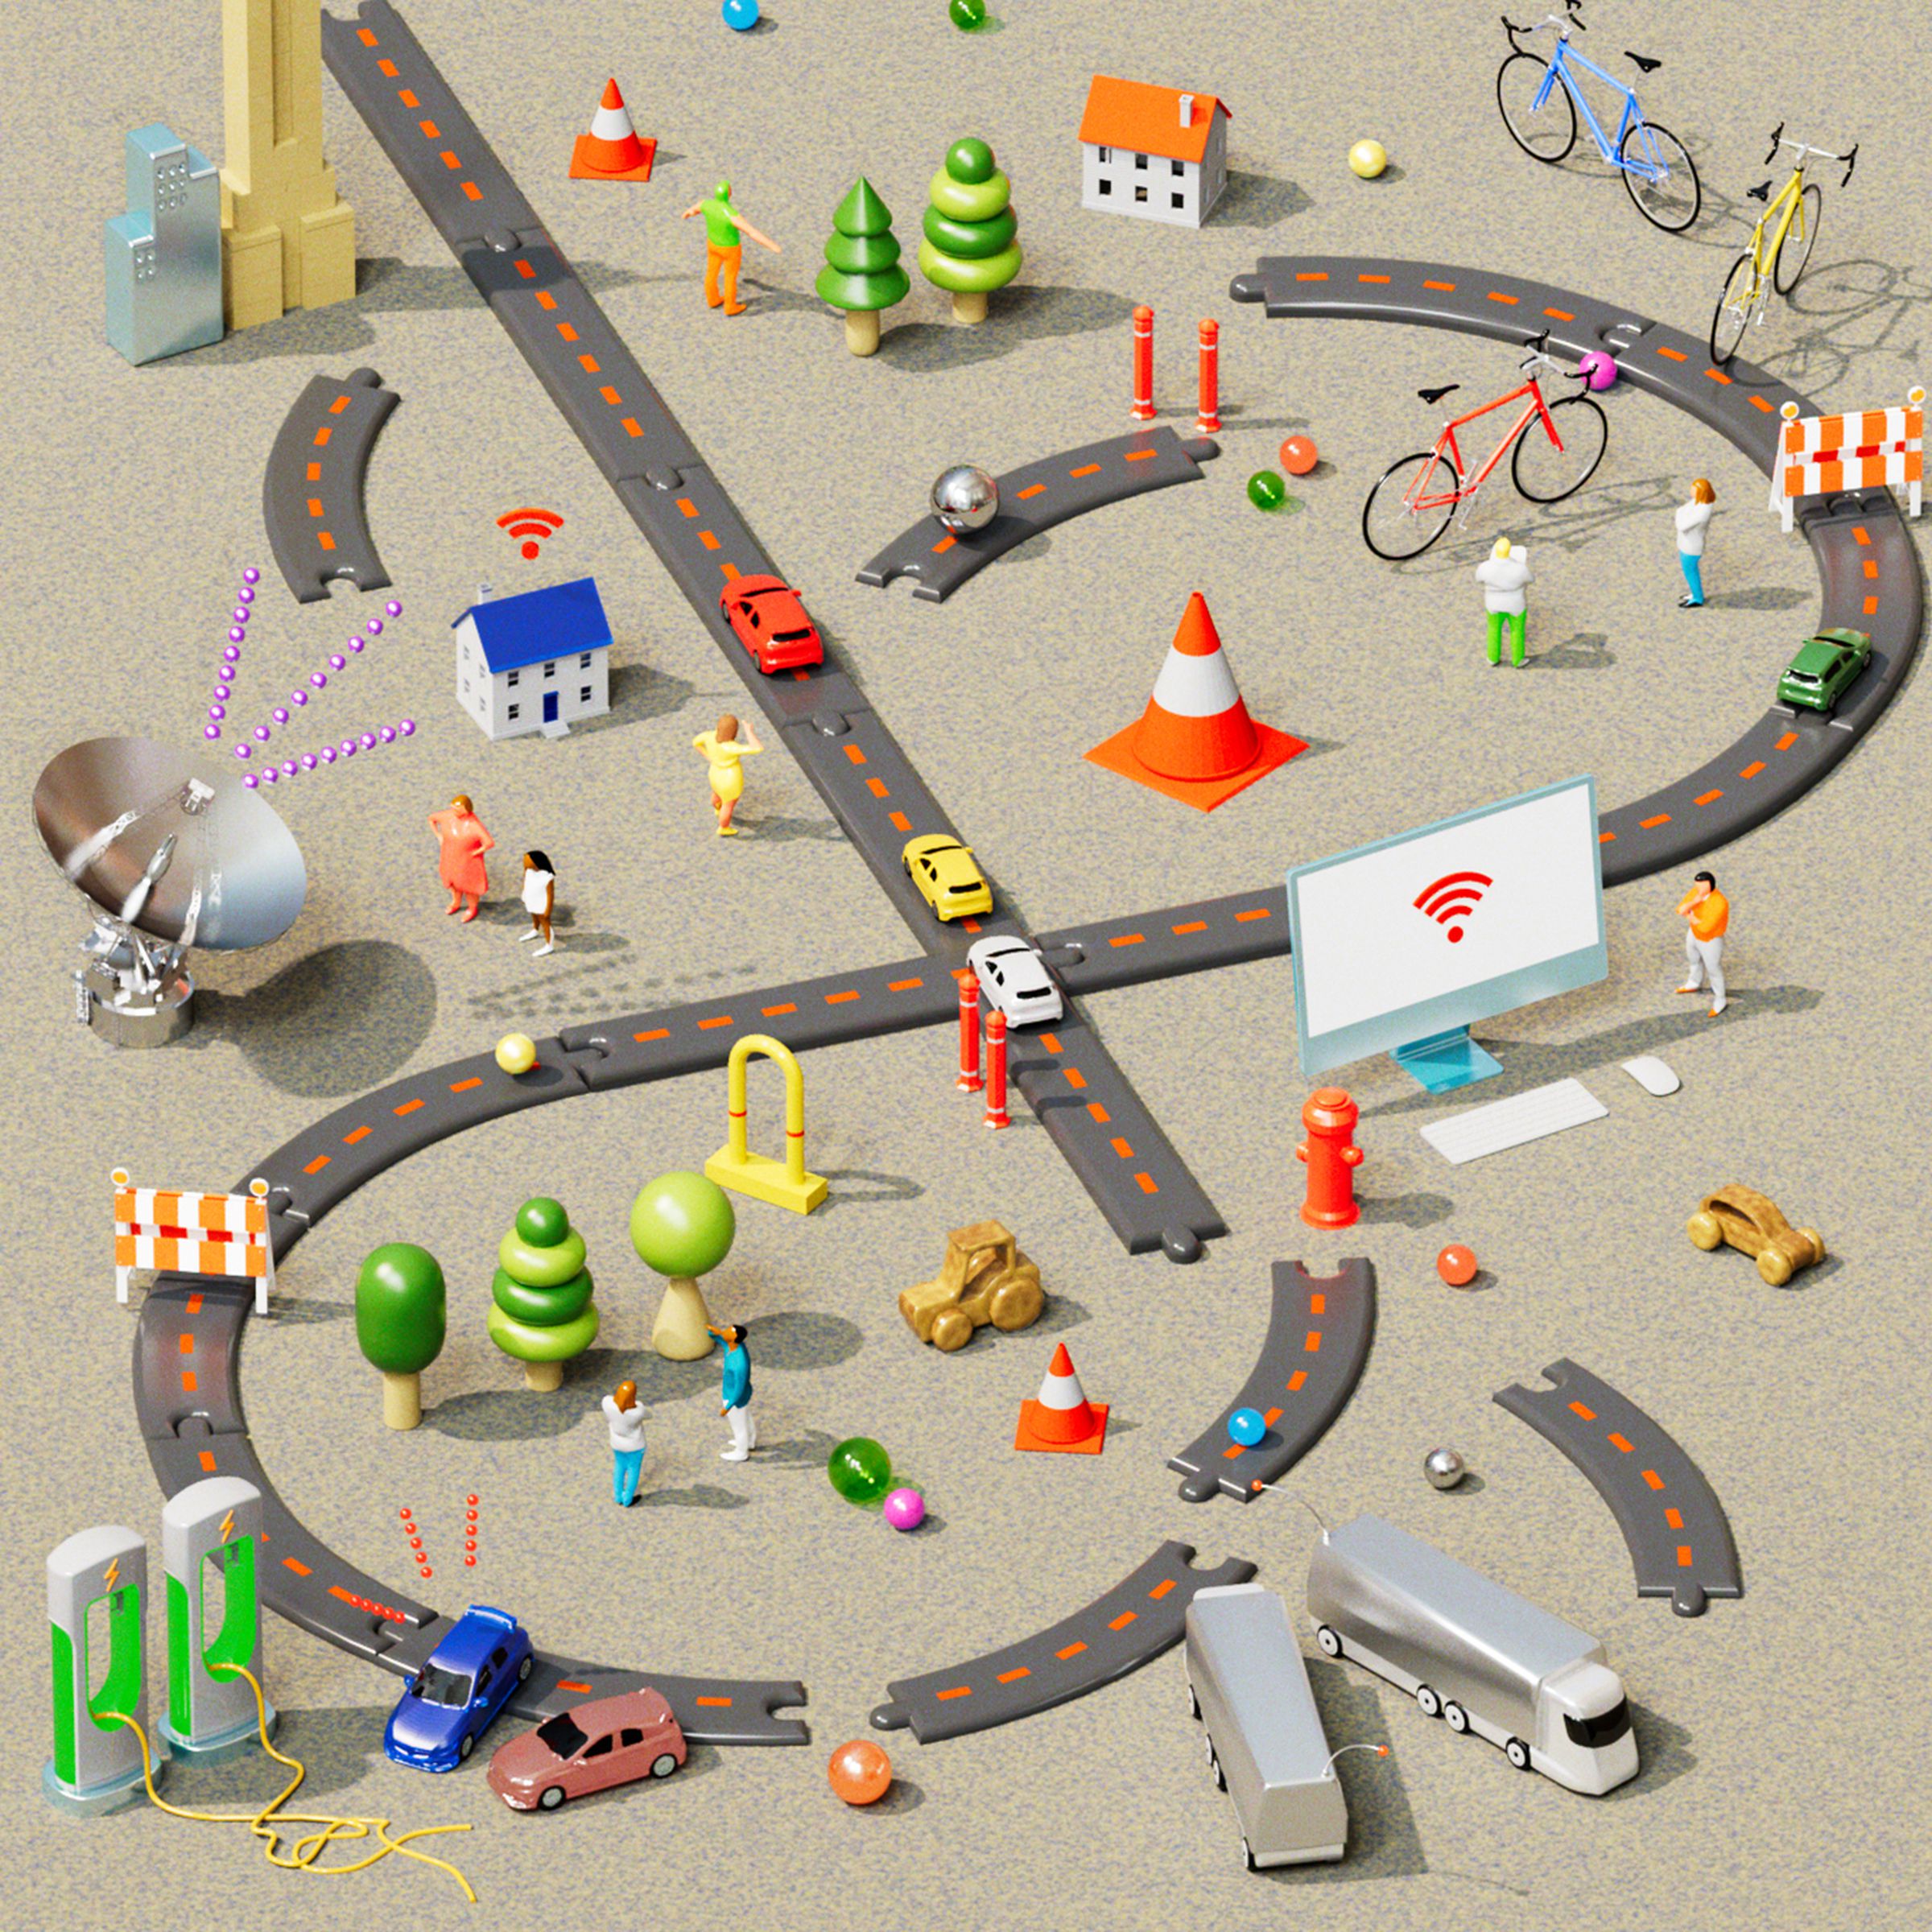 3D illustration of a sprawling scene of toy trucks, cars, electric chargers, tiny people, bikes, and satellites among a road playset that has yet to be put together properly.